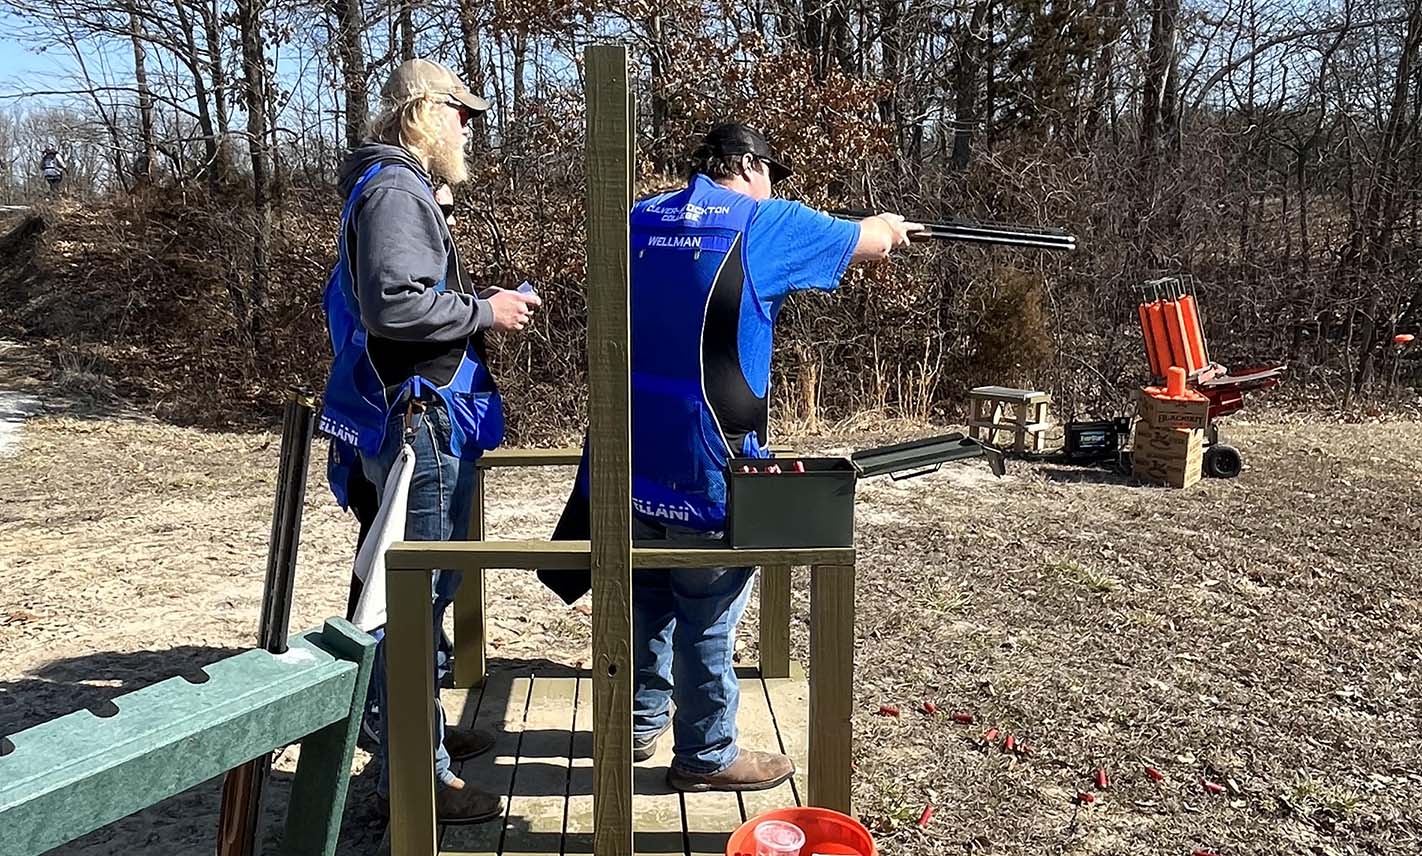 Wildcat Shooters Compete at Spring Lindenwood Open